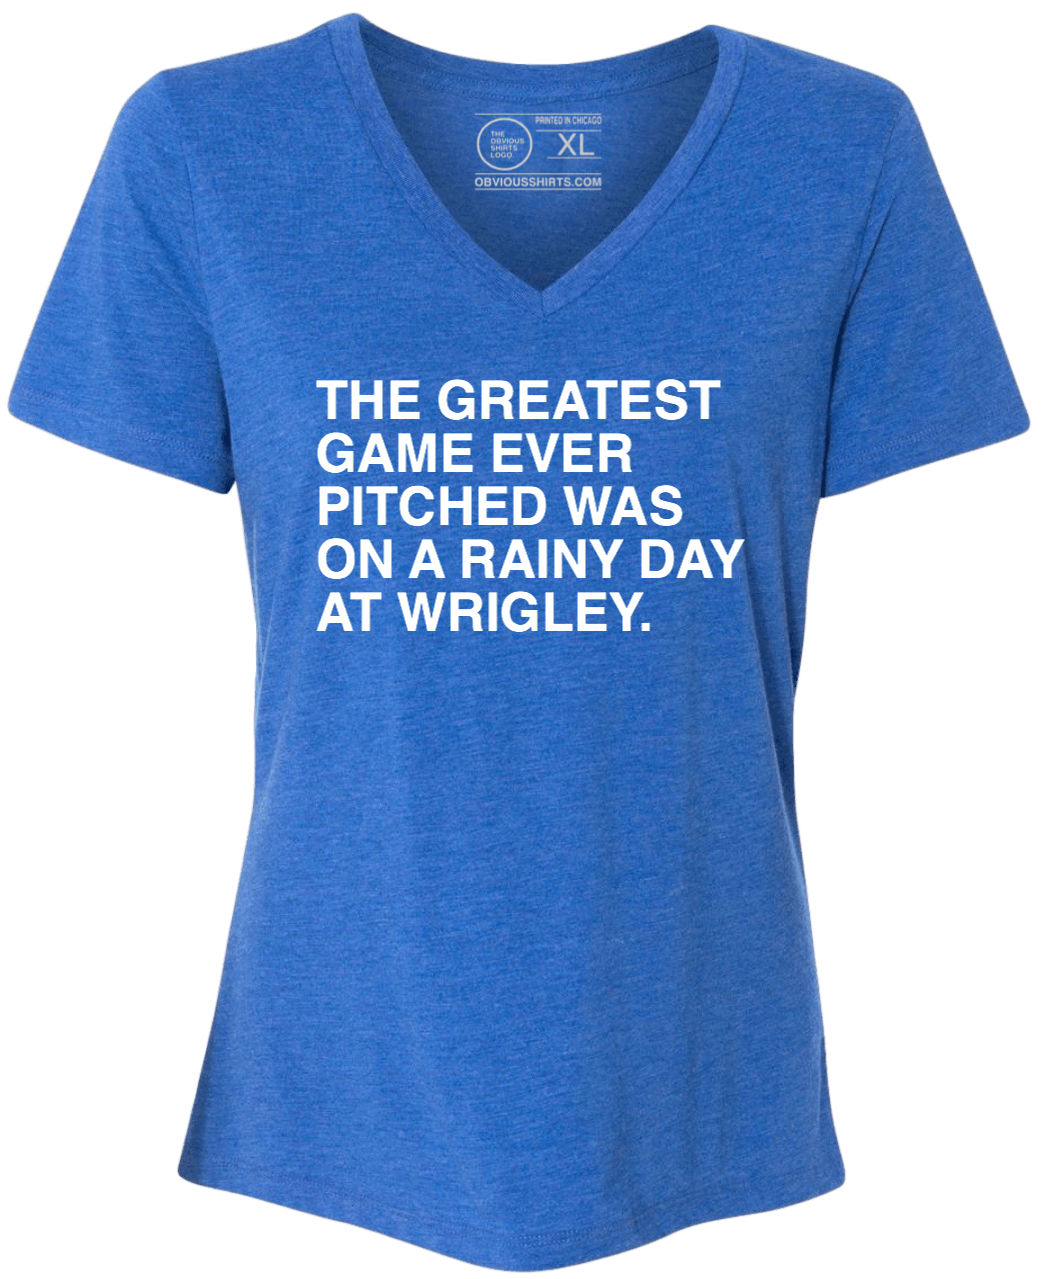 THE GREATEST GAME EVER PITCHED. (WOMEN'S V-NECK) - OBVIOUS SHIRTS.